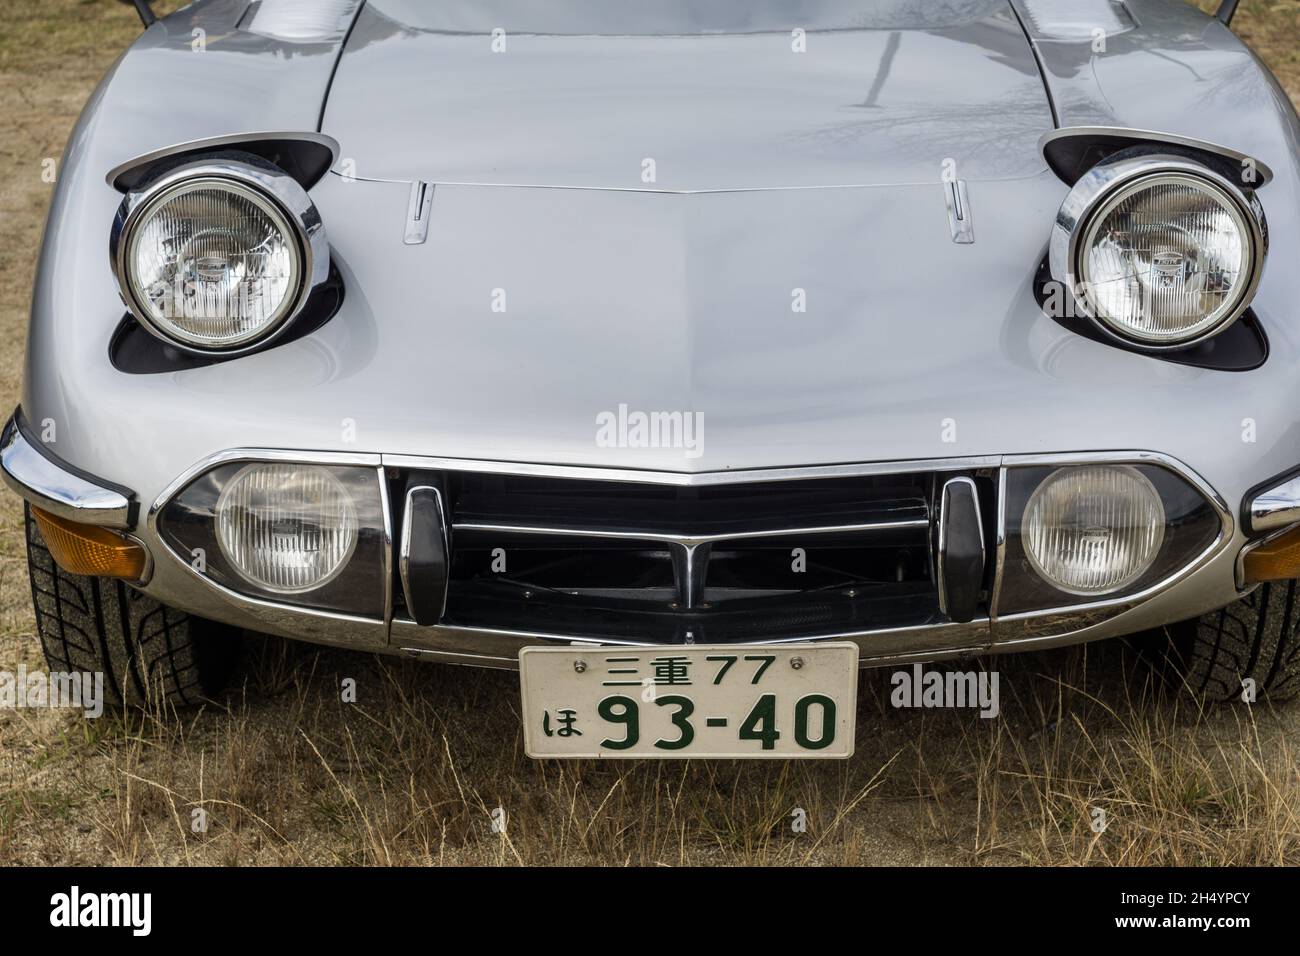 Pop Up Headlights High Resolution Stock Photography and Images - Alamy